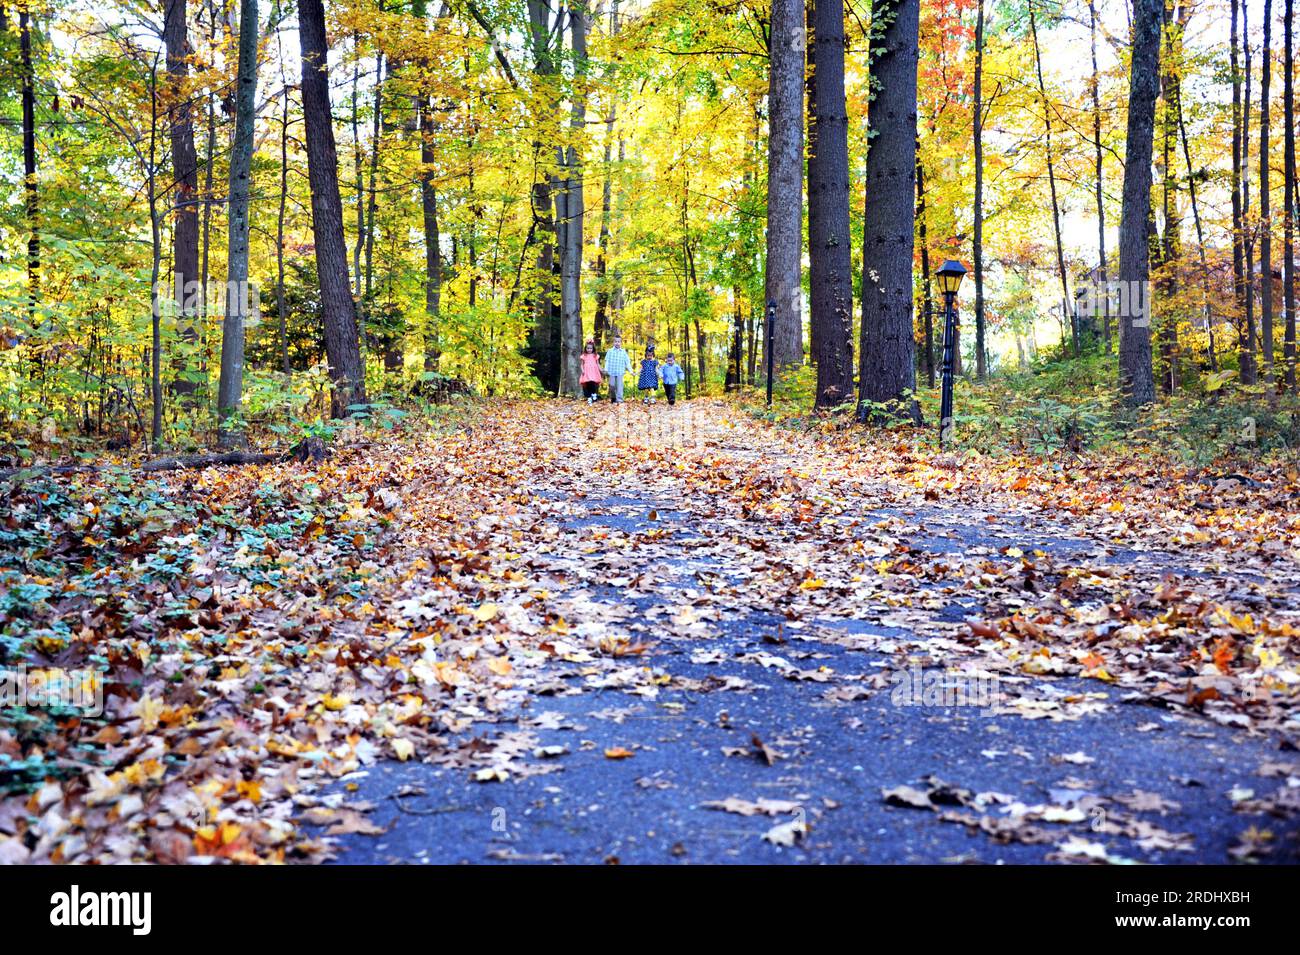 Four children start down a path strewn with leaves.  Autumn color fills Tennessee woods on this early morning.  Children are holding hands. Stock Photo